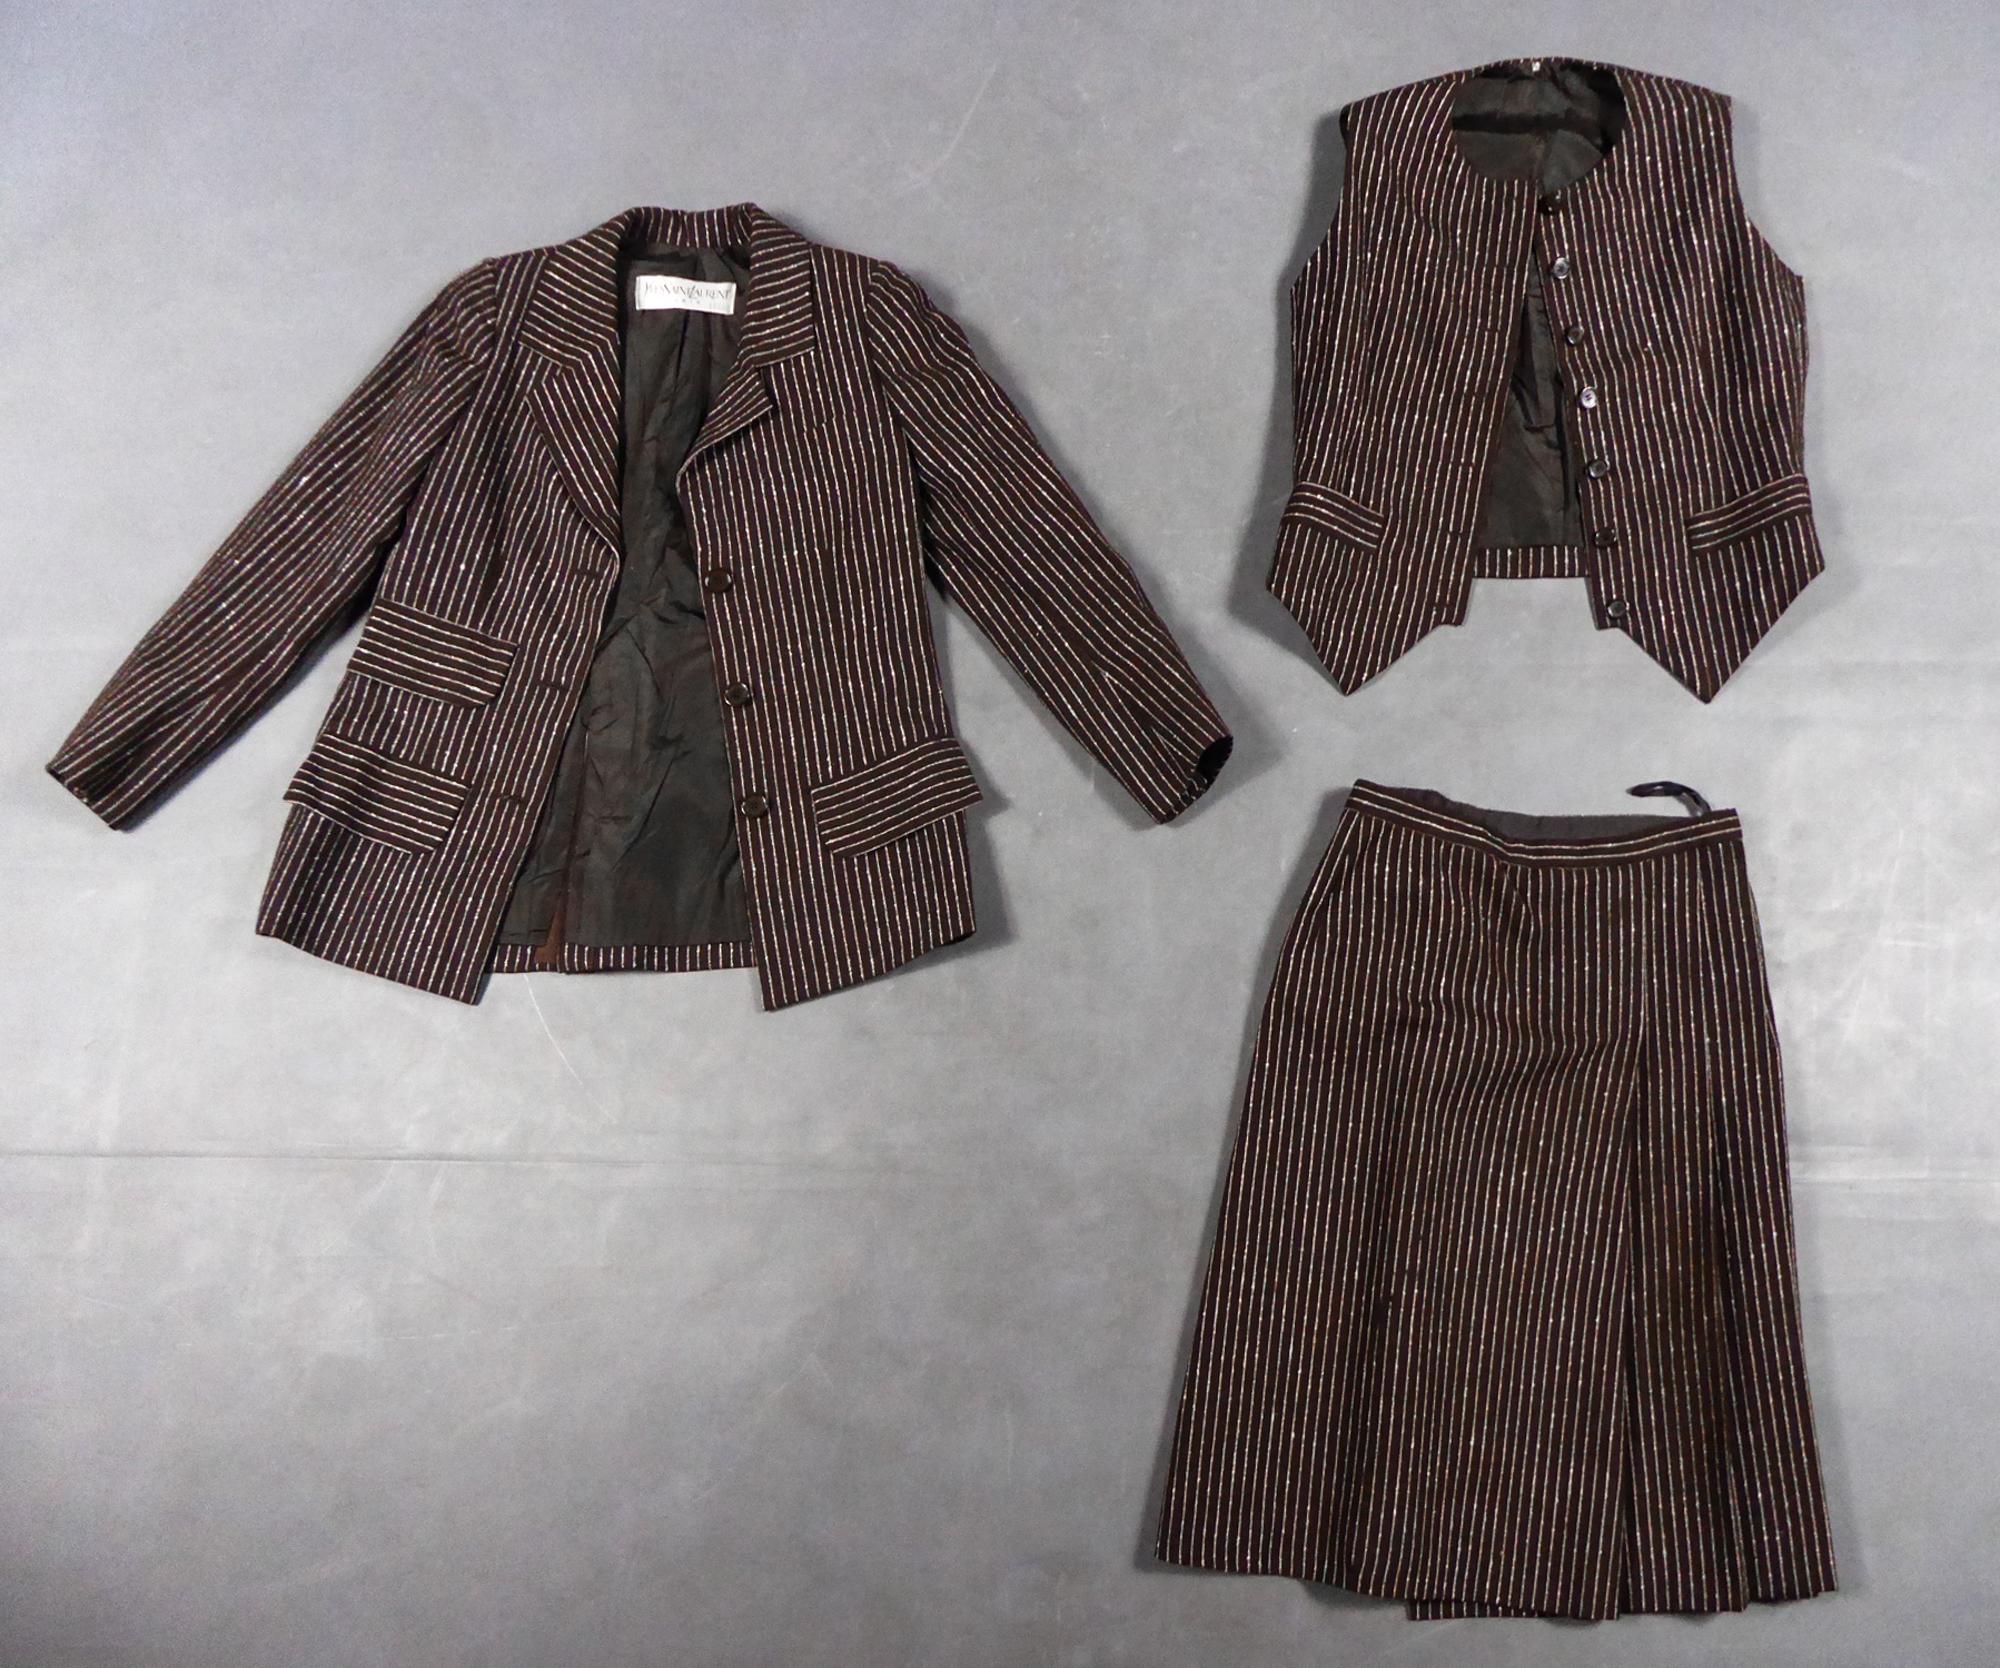 Circa 1967/1970
France

Iconic three-piece skirt suit with fine stripes as a counterpart to the famous trouser suit that Yves Saint Laurent created in 1967. Chocolate wool cloth woven with fine cream curly stripes. Clearly inspired by the men's